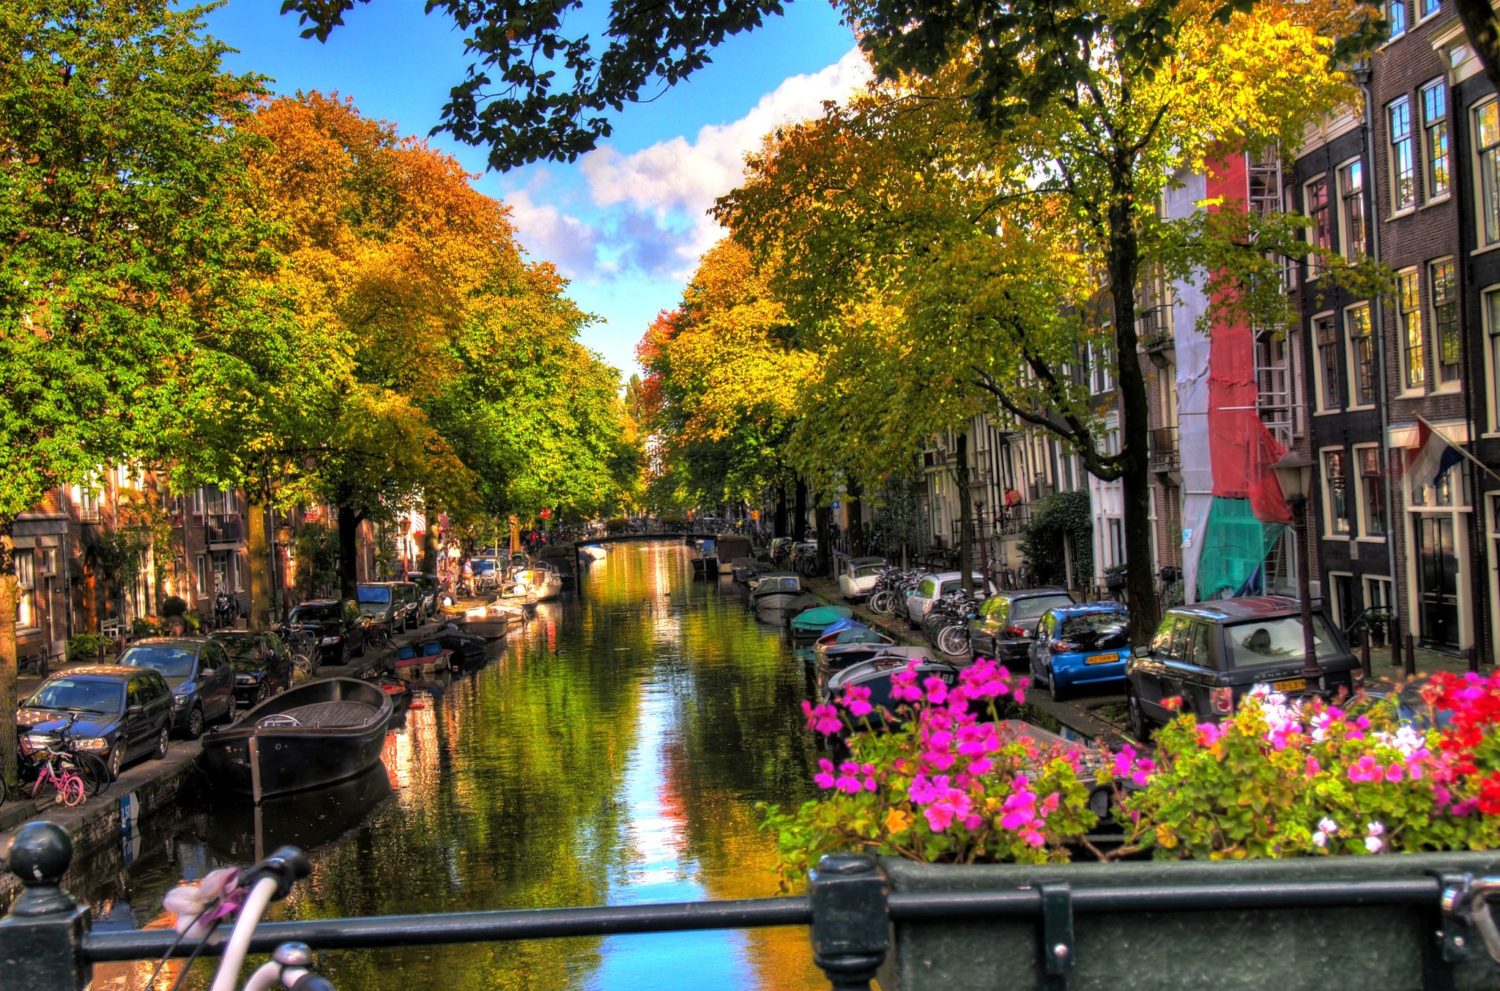 Cheaper flights to Europe for fall colors